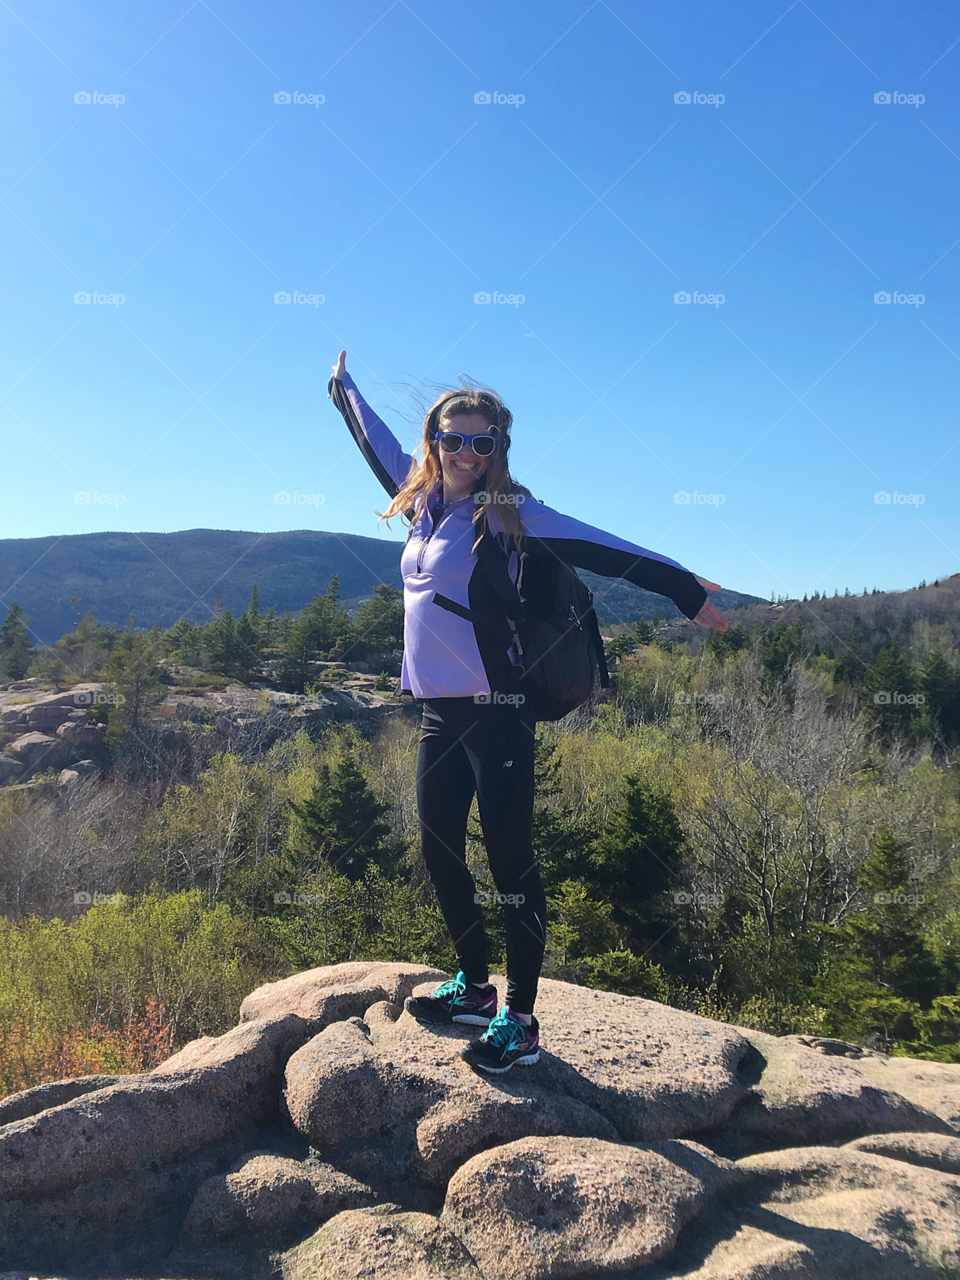 A woman stands triumphantly at the summit of a mountain hiking trail. The mountain woods below show the first signs of spring